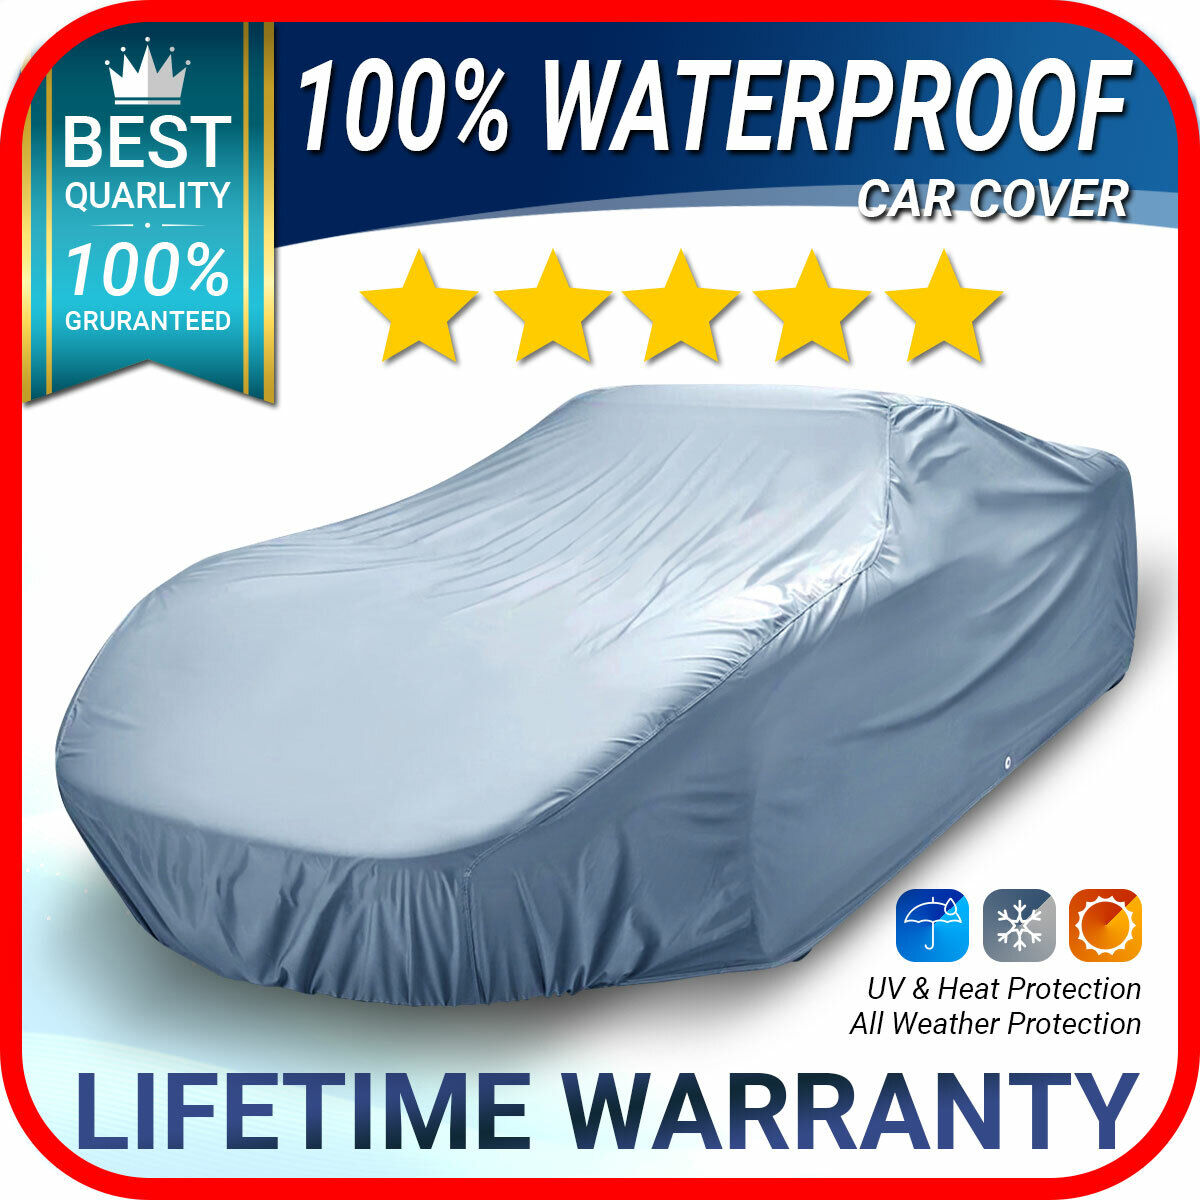 Full Exterior Car Cover for Outdoor Waterproof All-Weather Hail Snow Heavy Duty